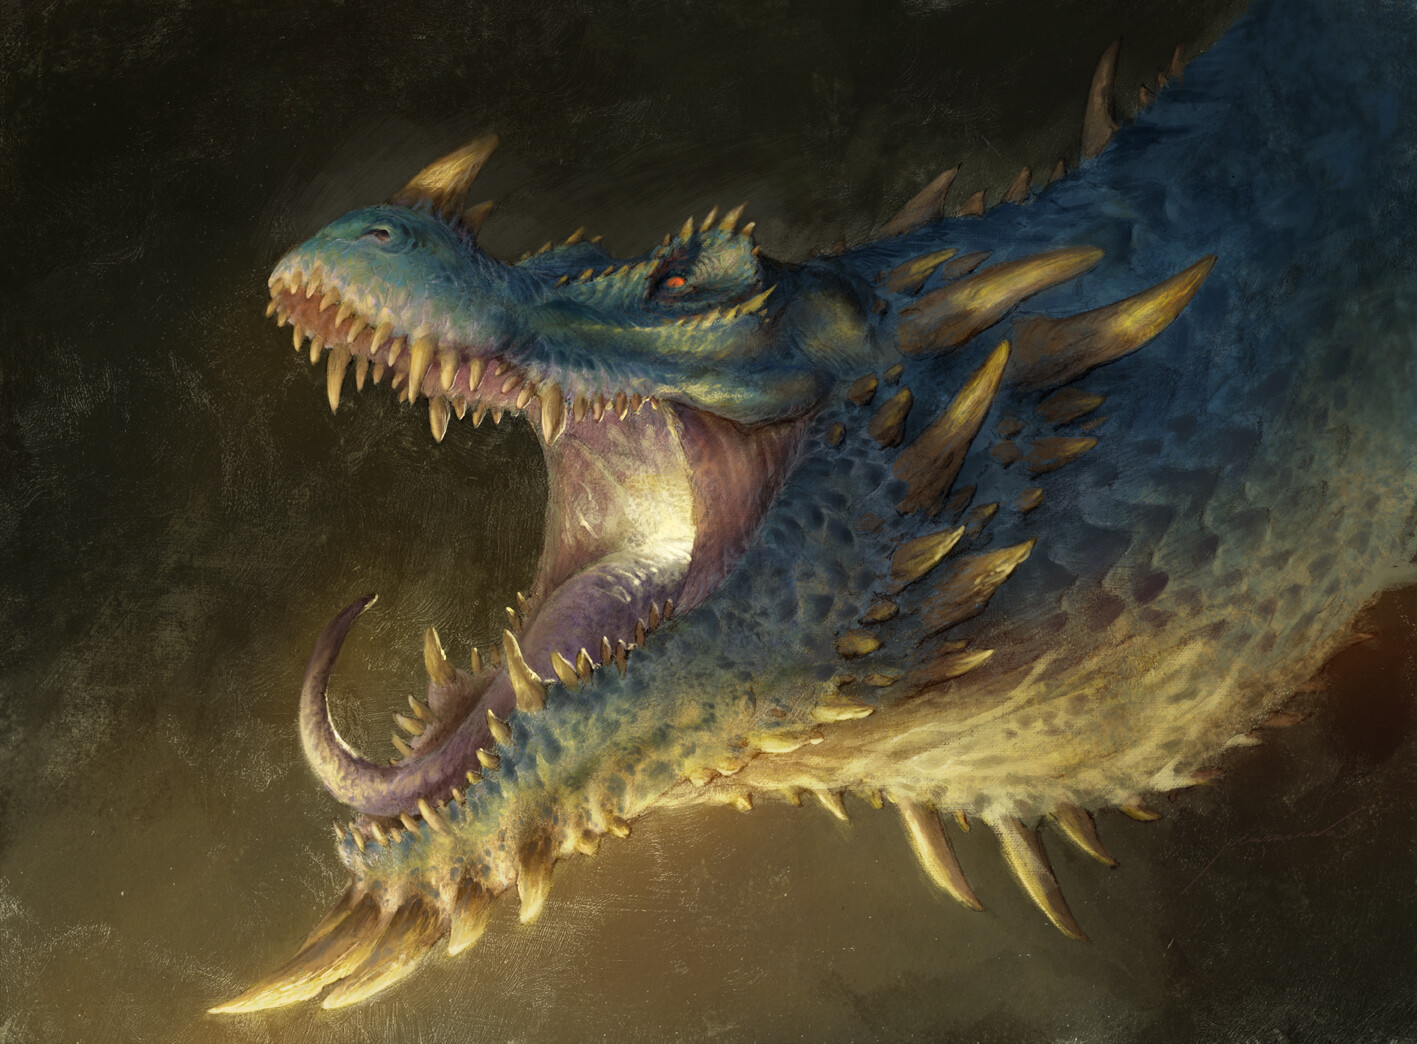 Blue dragon. Pencil on paper and finally I painted it with Photoshop